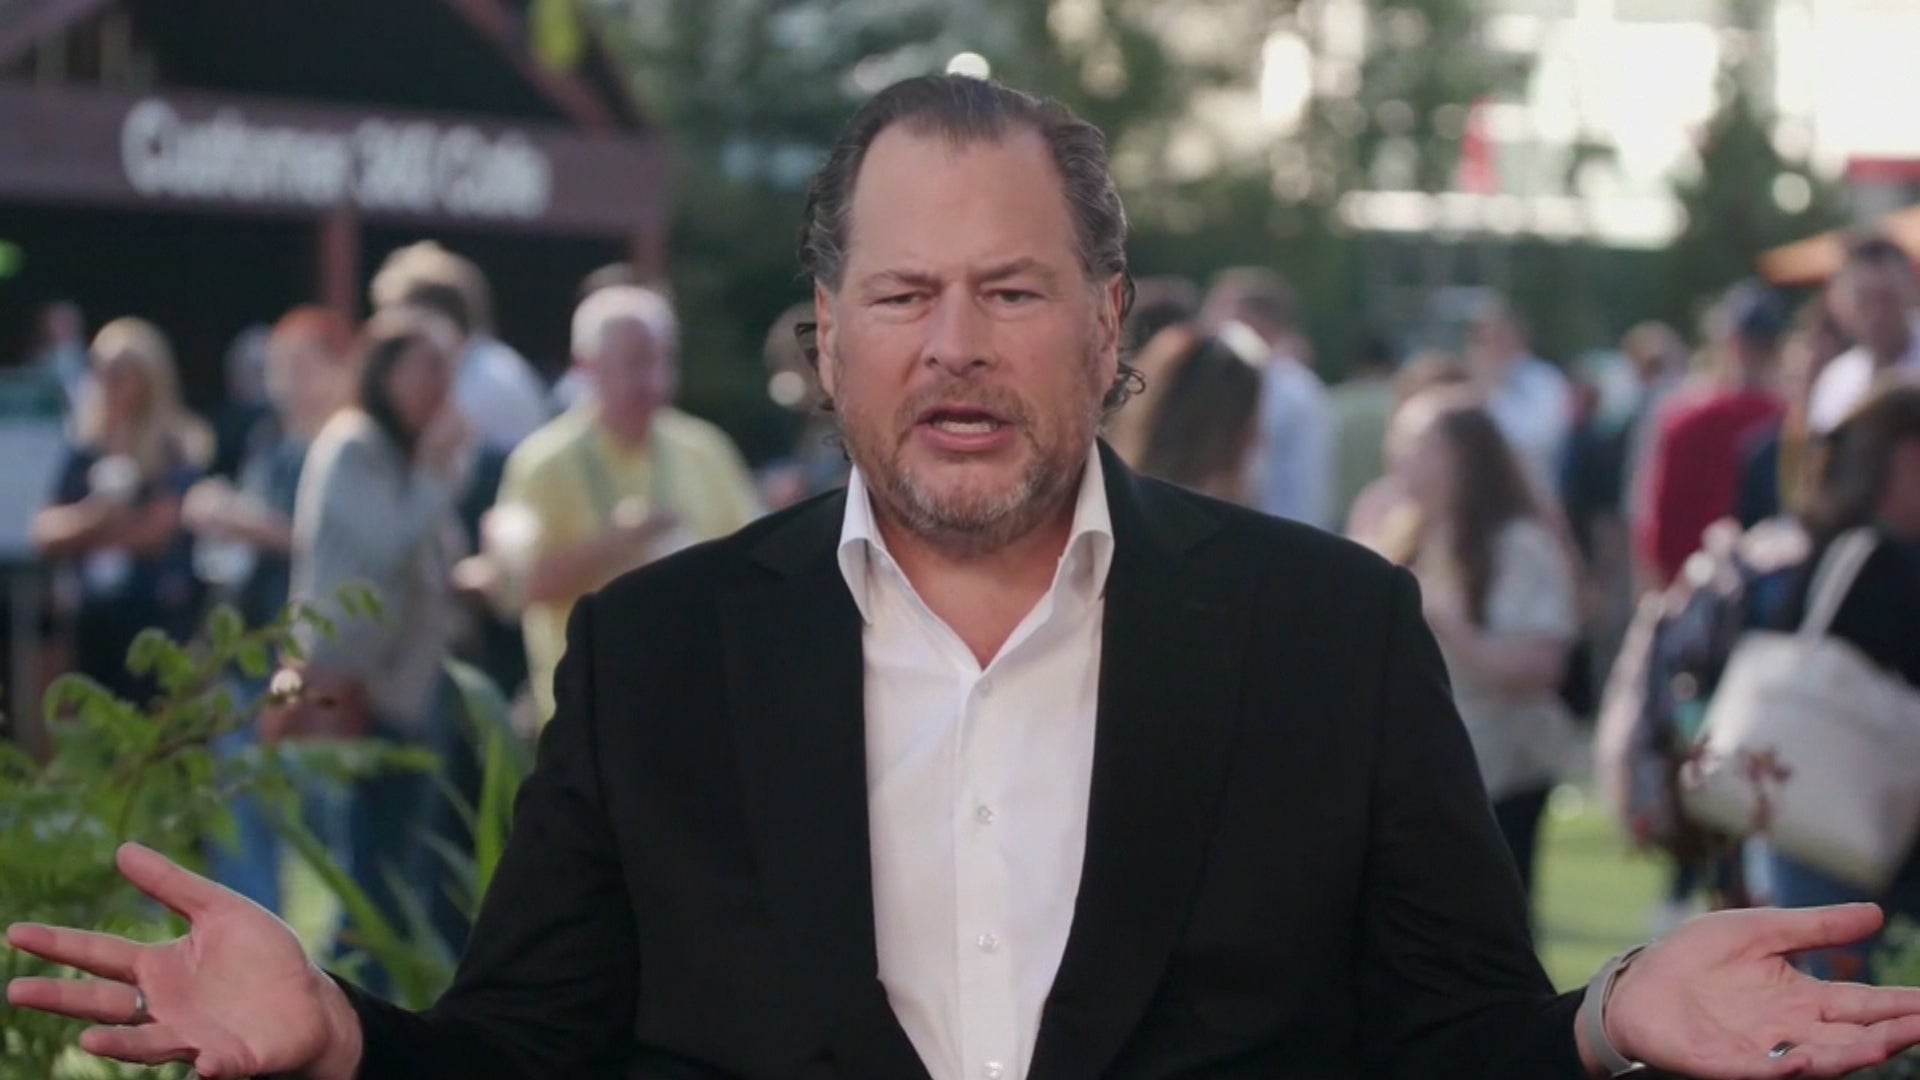 Salesforce co-CEO considers pulling resources out of Indiana